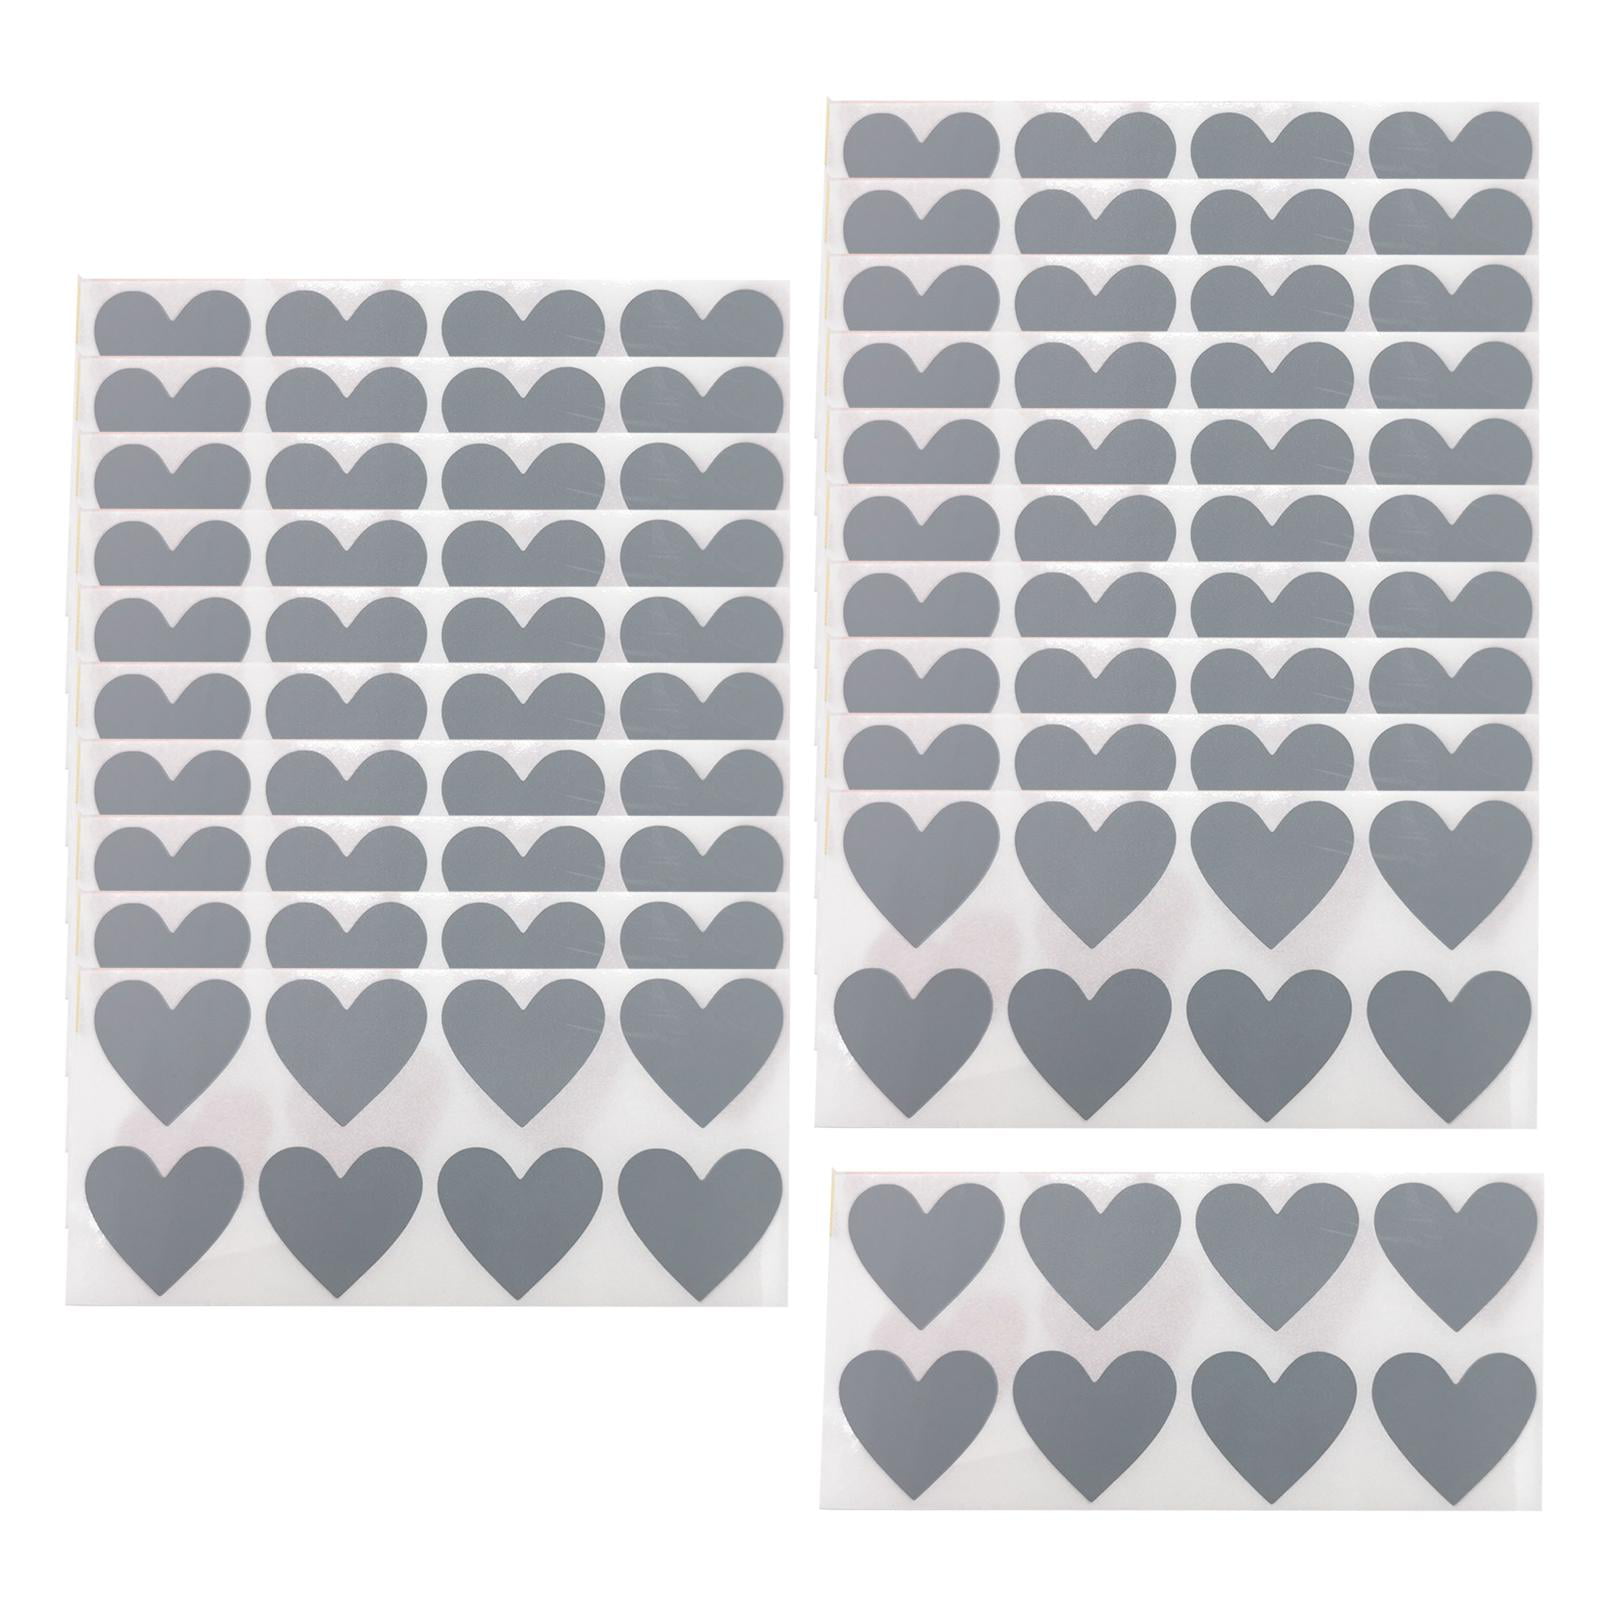 500 Pcs Heart Stickers Black And Pink Seal Labels Christmas Gift